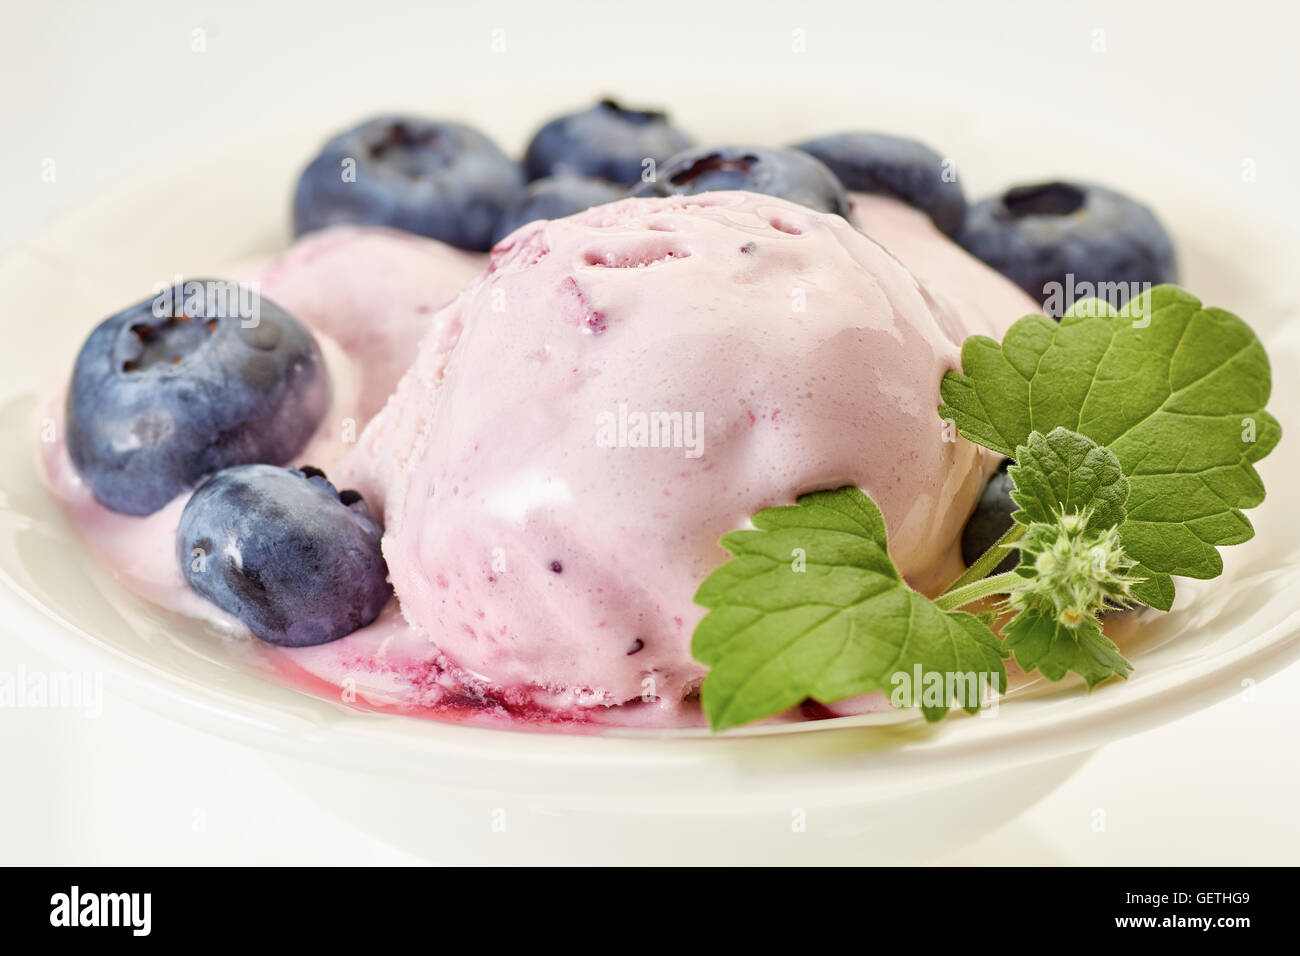 Ice cream with blueberries and branch of mint Stock Photo